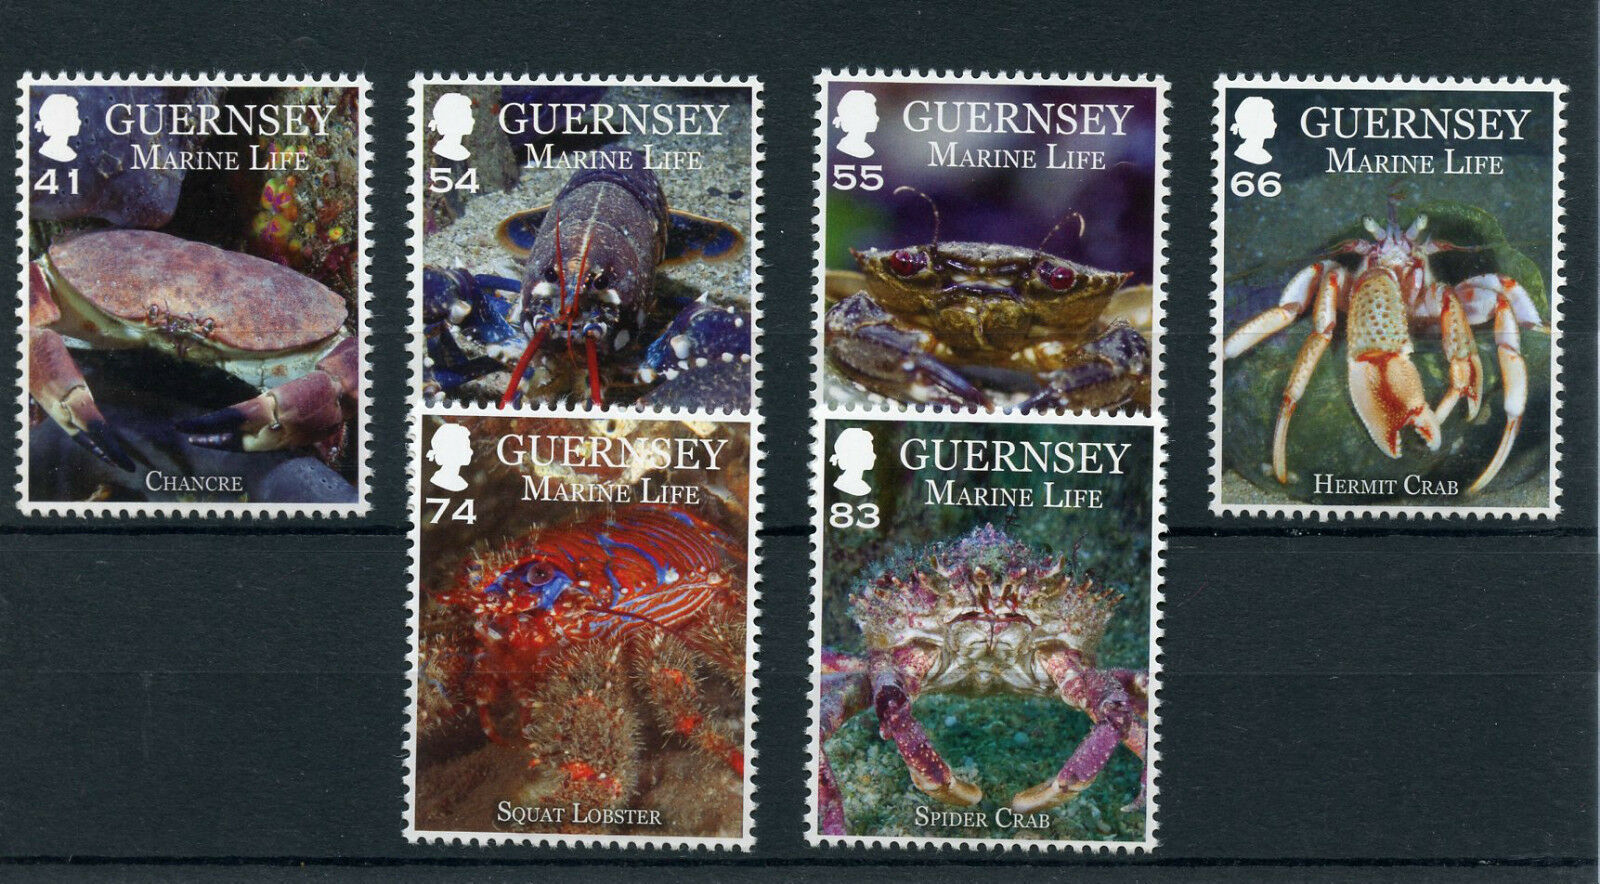 Guernsey 2014 MNH Marine Life II Crustaceans 6v Set Chancre Lobster Hermit Crab